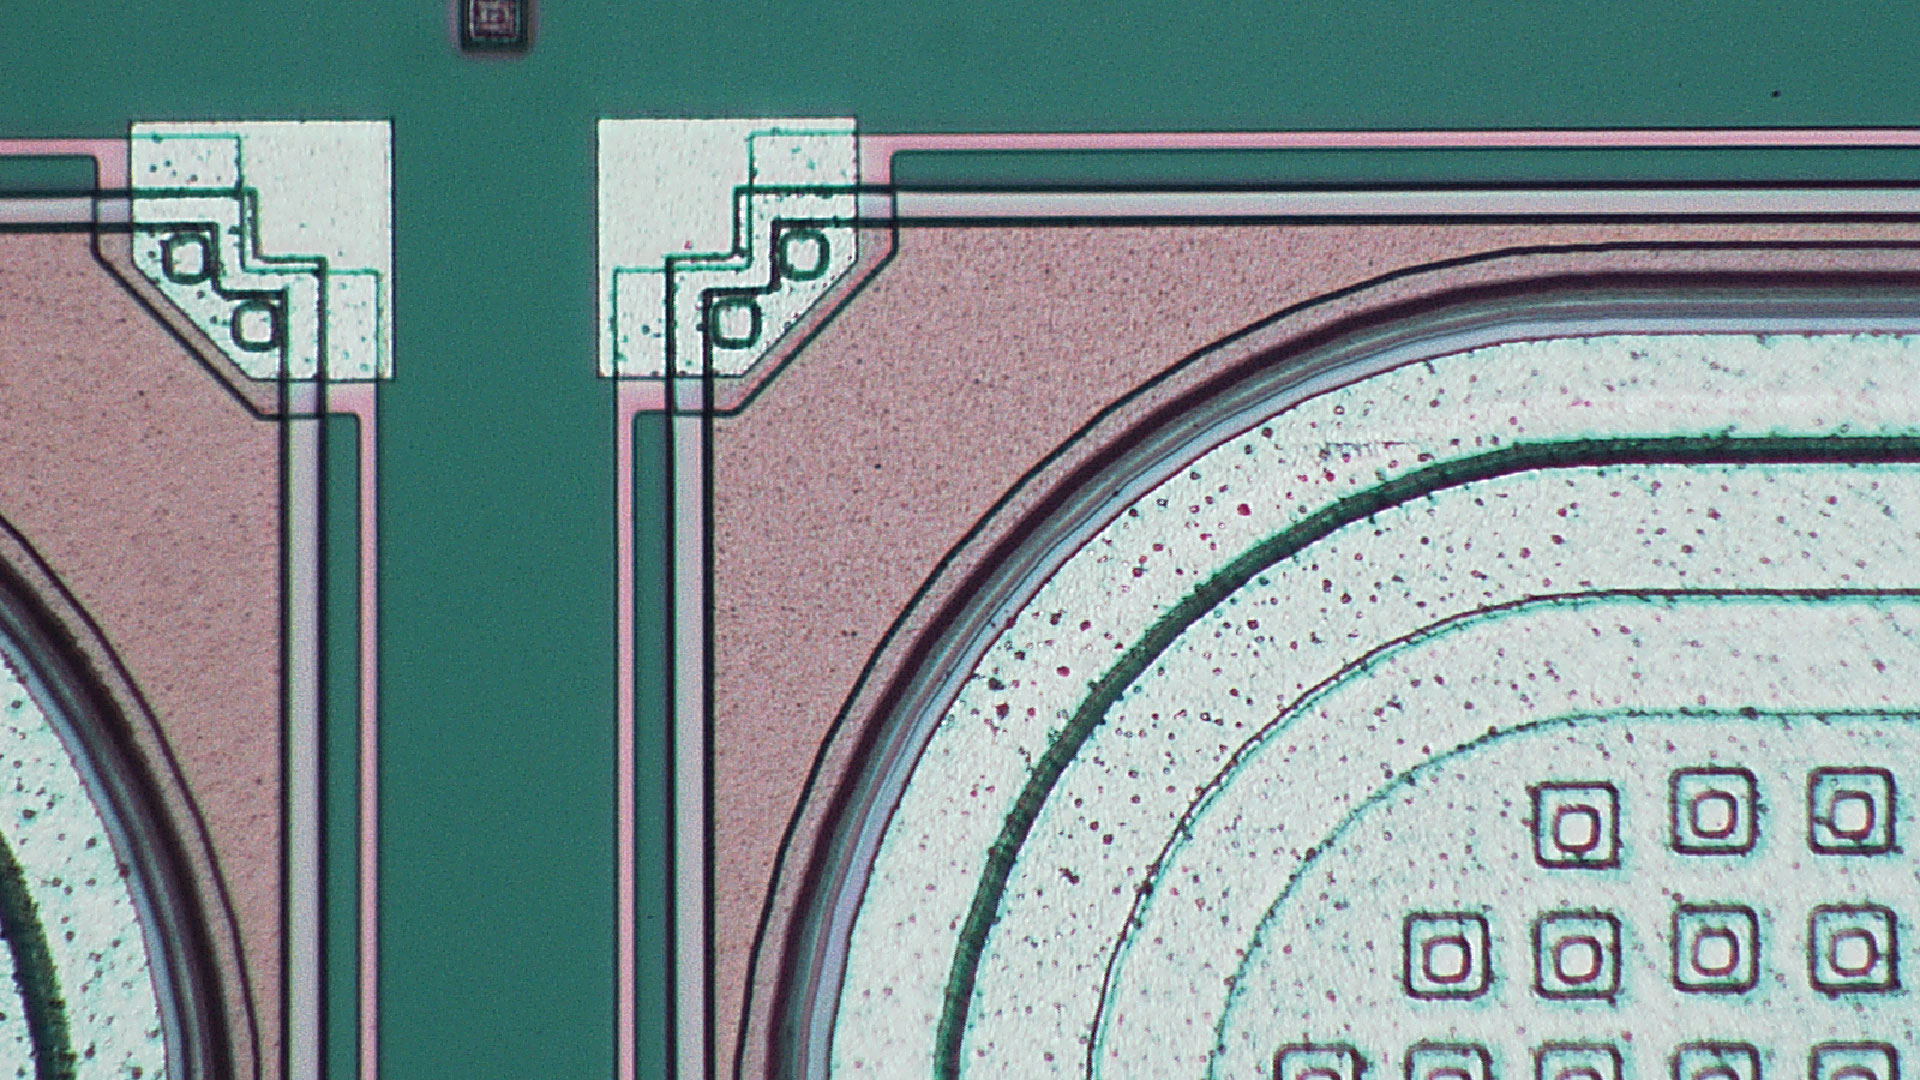 [Translate to spanish:] To better see fine details and defects, a semiconductor material can be inspected using a microscope with various types of lighting. This image was taken with coaxial illumination. 